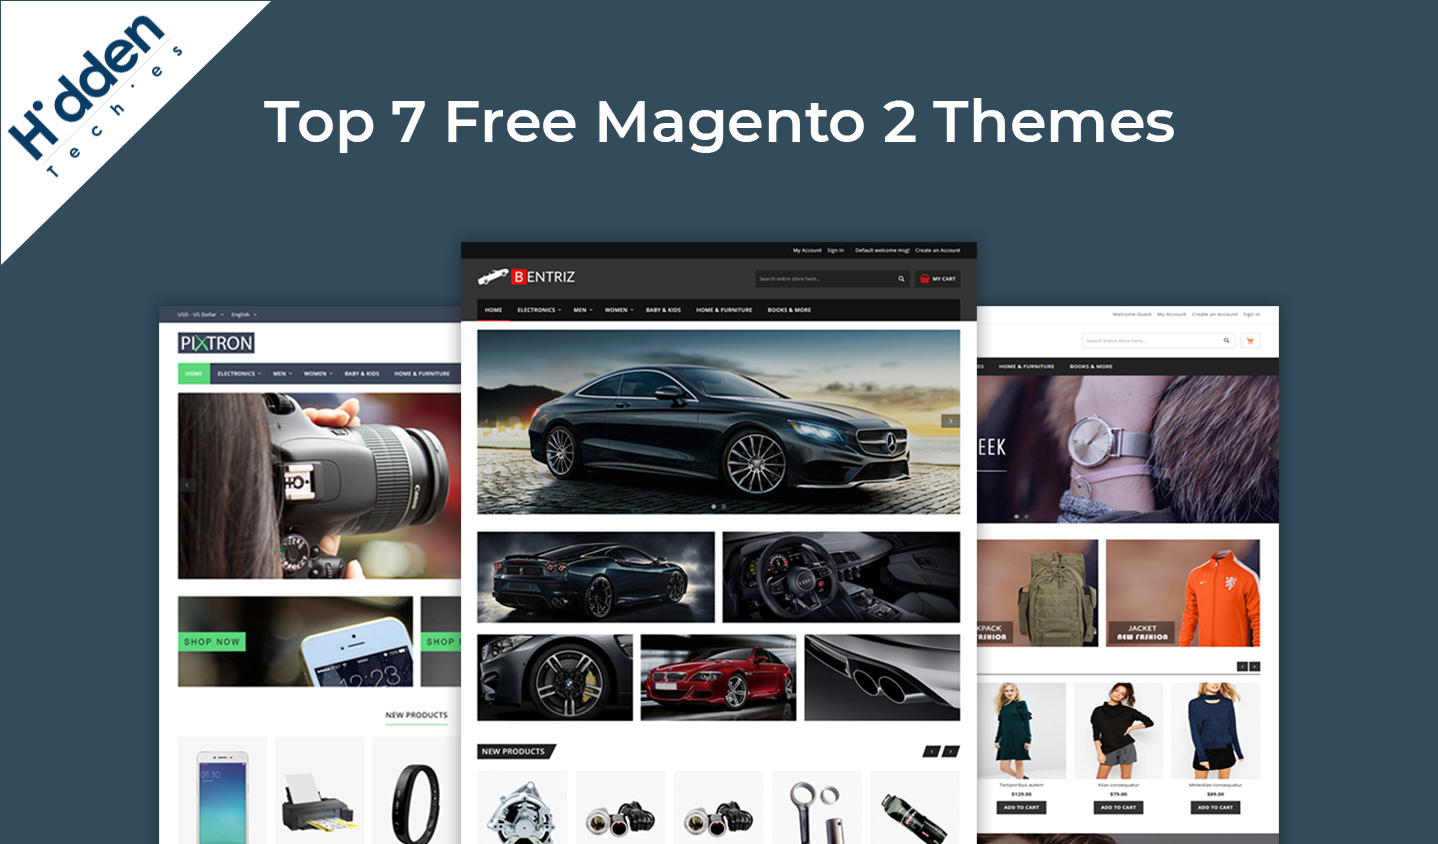 Top 7 Free Magento 2 Themes For 2018